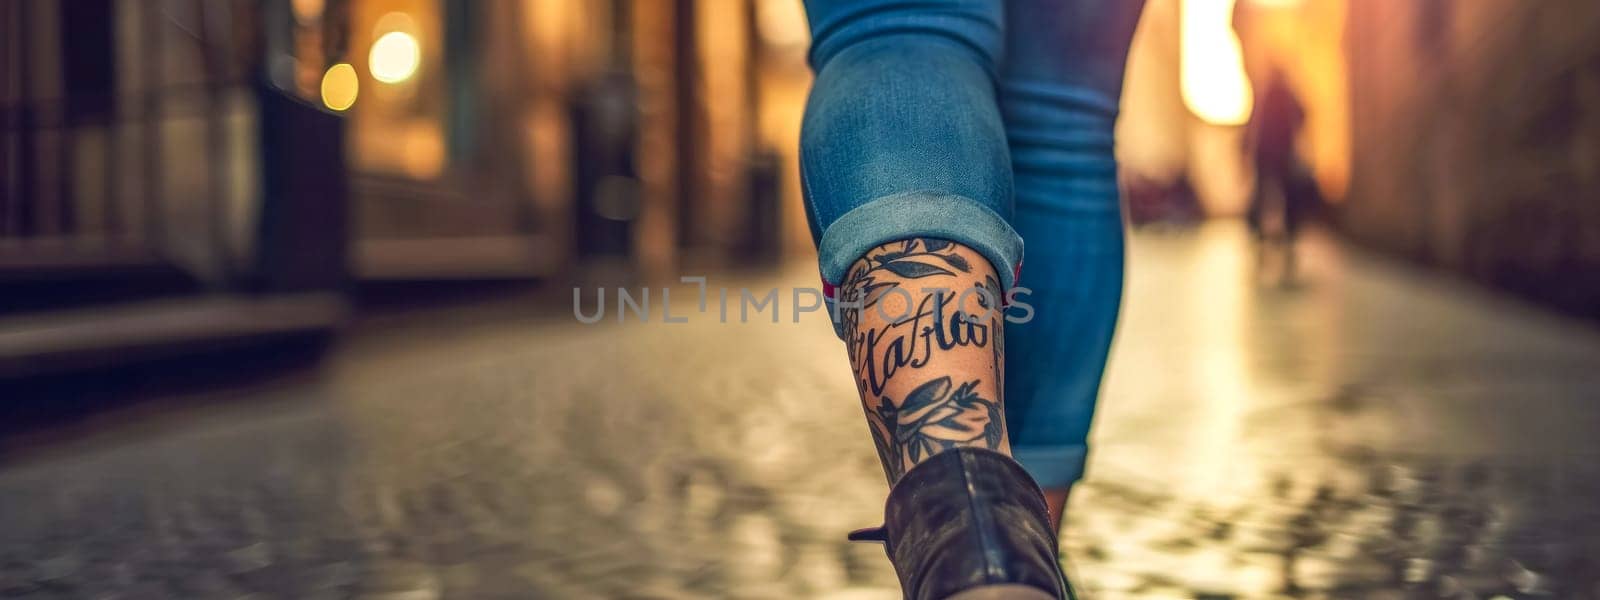 tattooed leg with the word "Tattoo" inked amongst floral designs, set against the backdrop of a blurred, warmly lit street scene, adding a dynamic urban feel to the personal expression of body art.